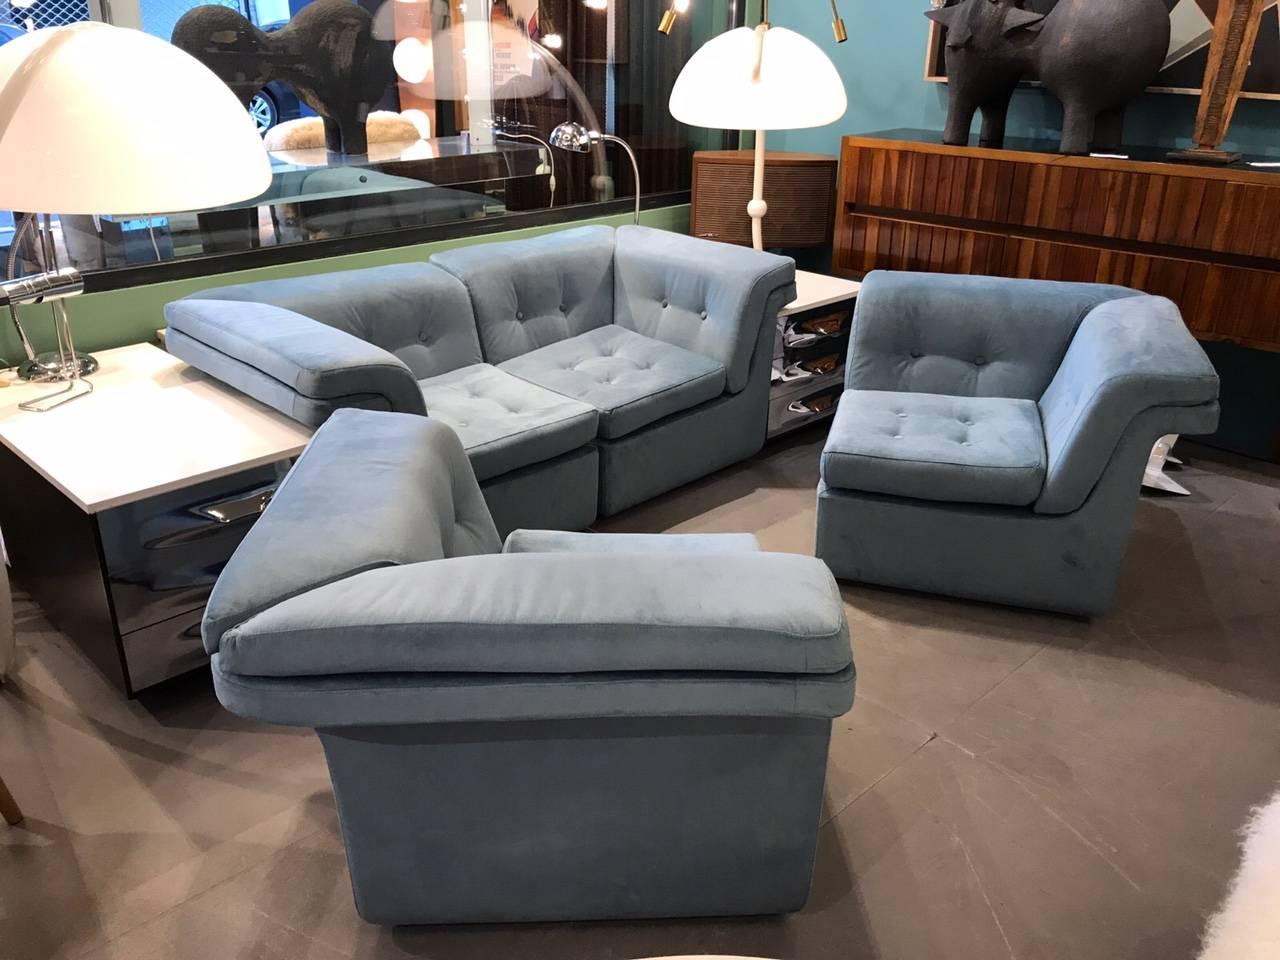 Armchairs and sofa have been reupholstered in clear blue velvet
chromed drawers

Two-seat sofa and two chest of drawers:
width 238 cm x 75 cm.

Each single armchairs are 75 cm x 75 cm X 60 cm height.